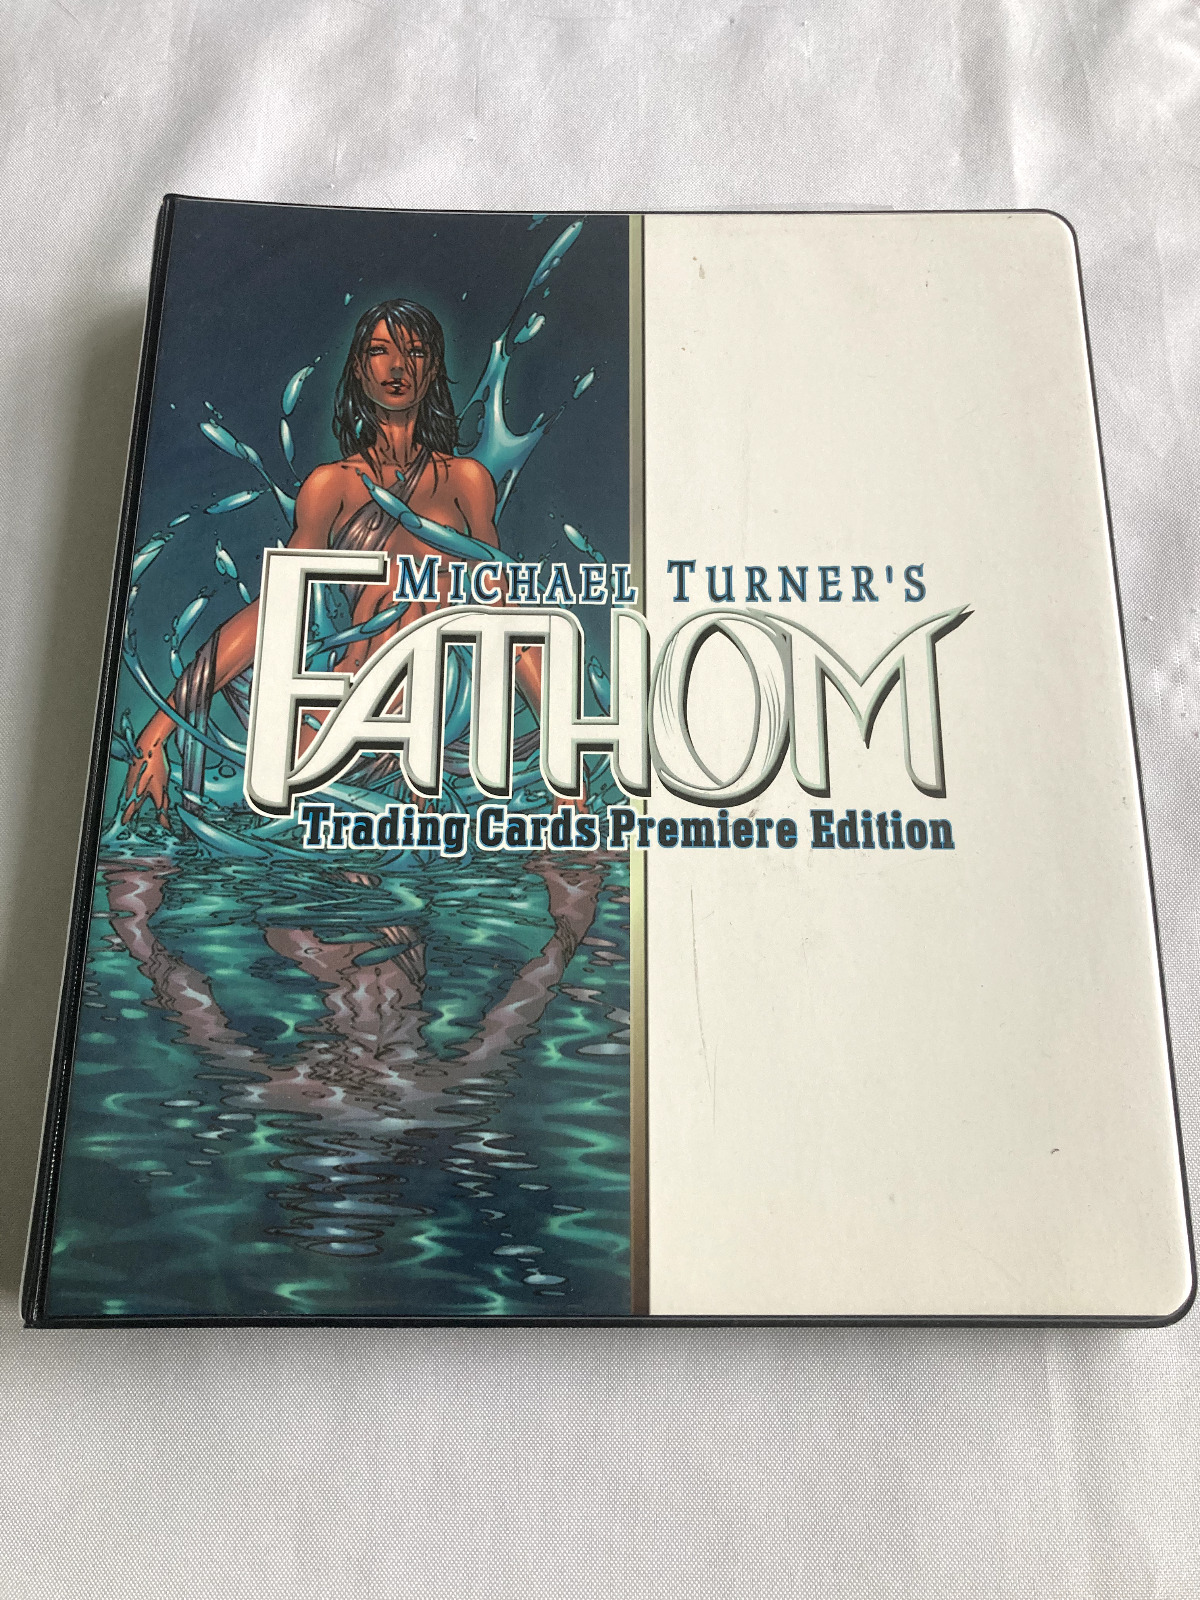 FATHOM PREMIERE EDITION TRADING CARD BINDER, CARDS, CHASES, SKETCHES, 2001